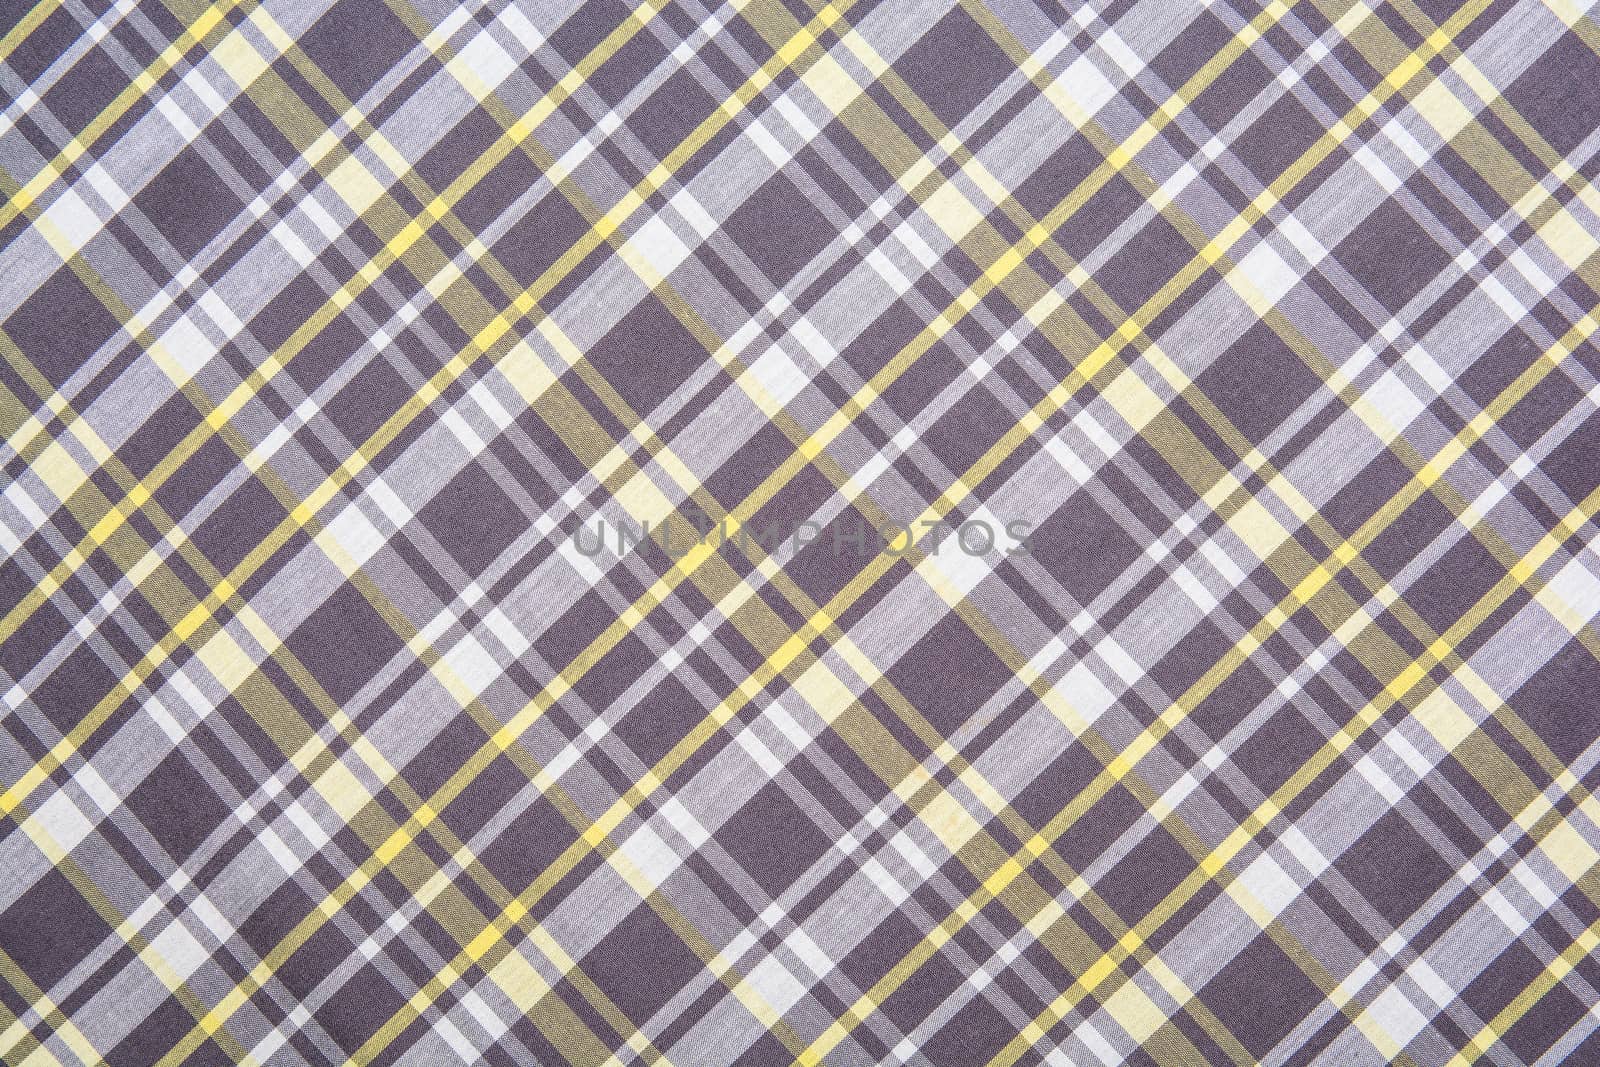 the beautiful close up plaid pattern ideal for wallpaper and background purposes